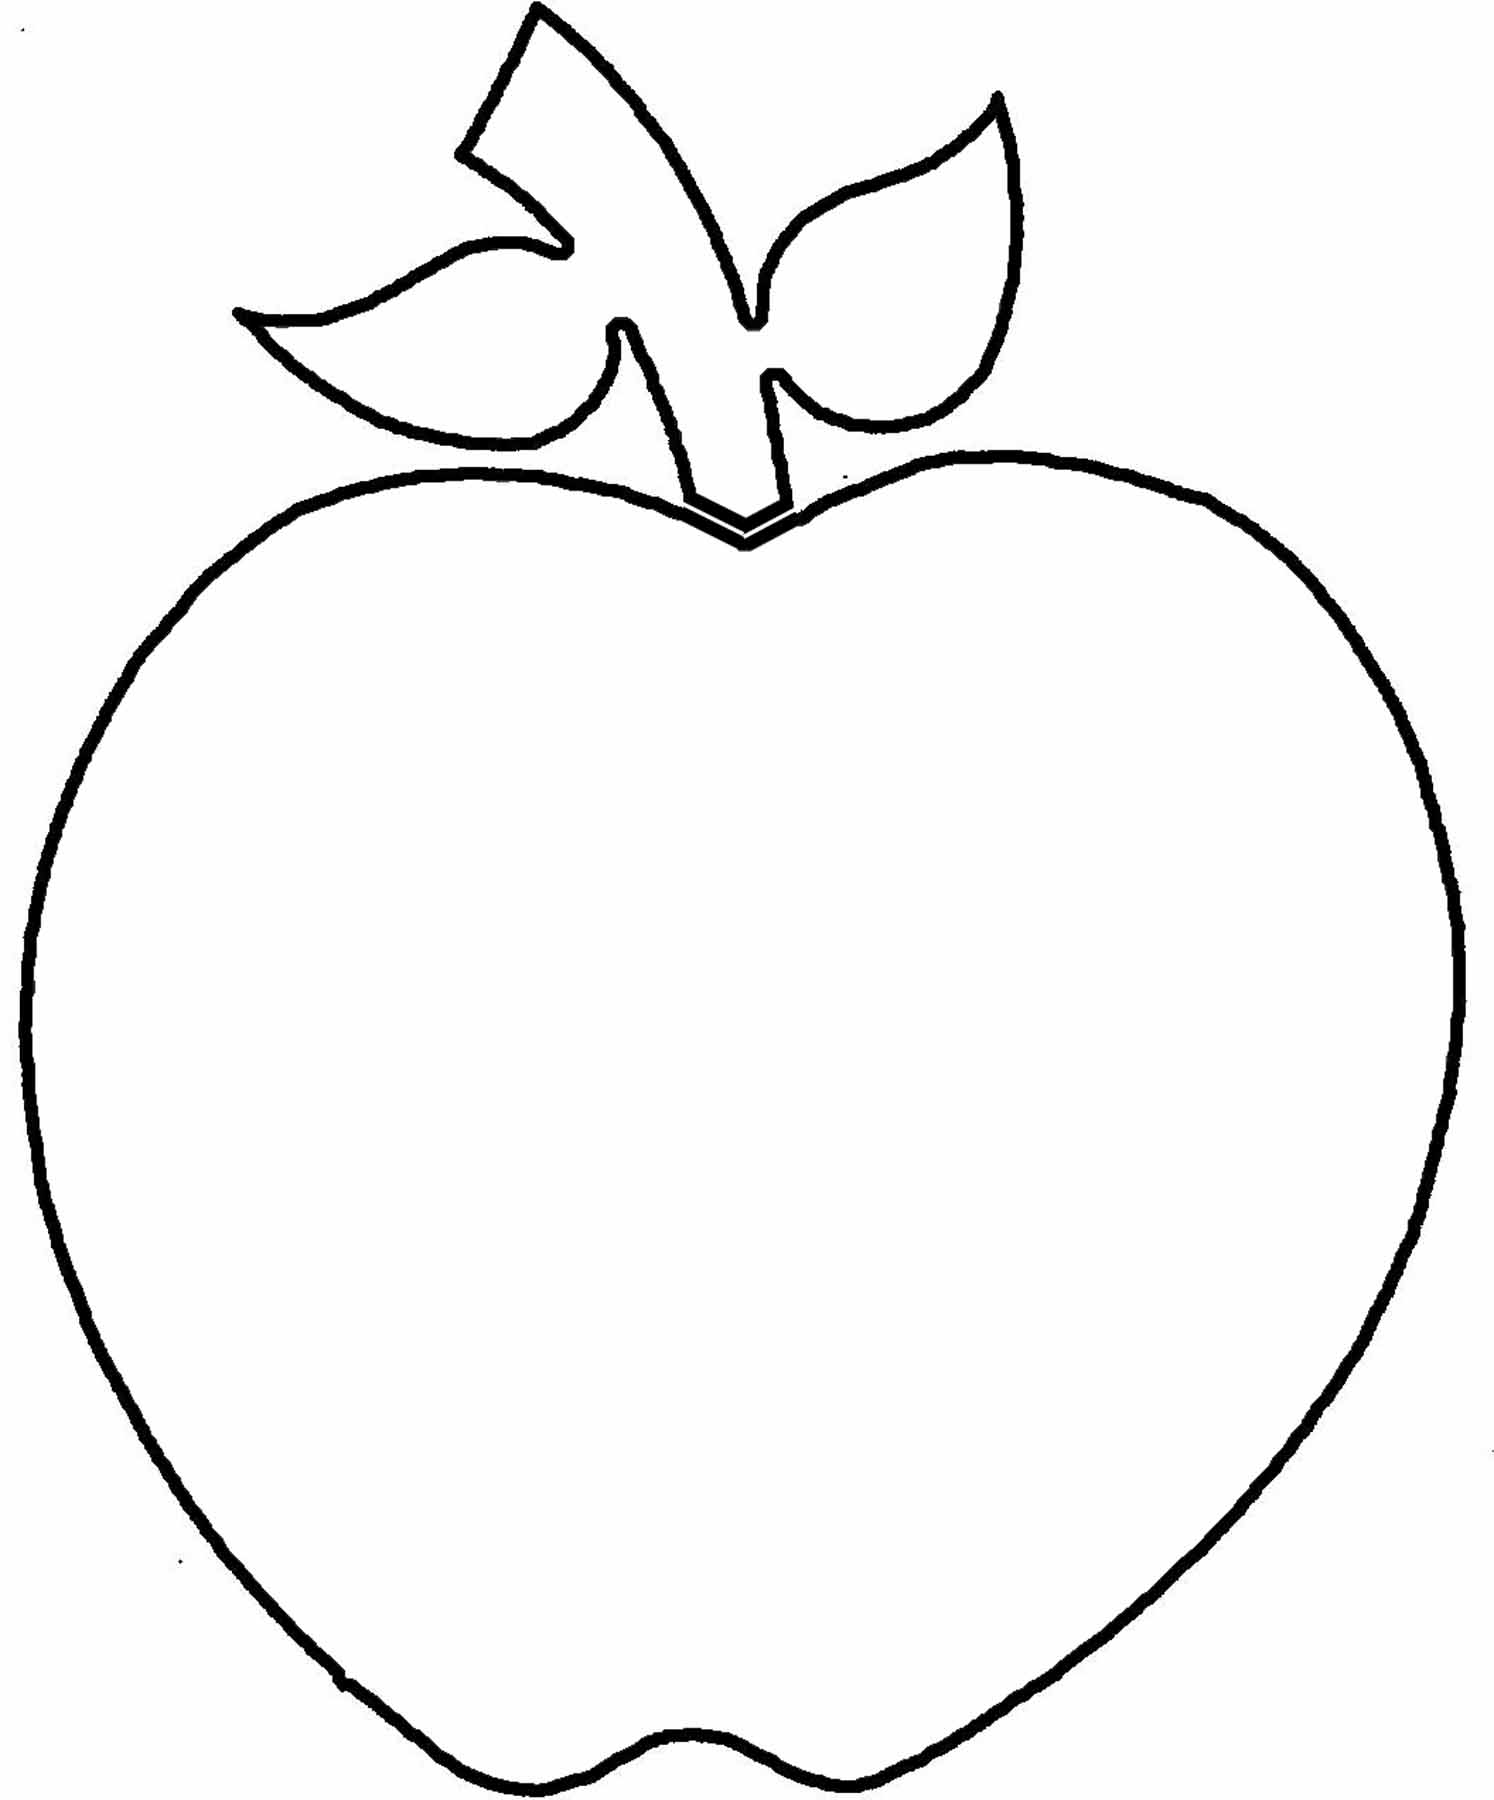 free apple clipart black and white - photo #50